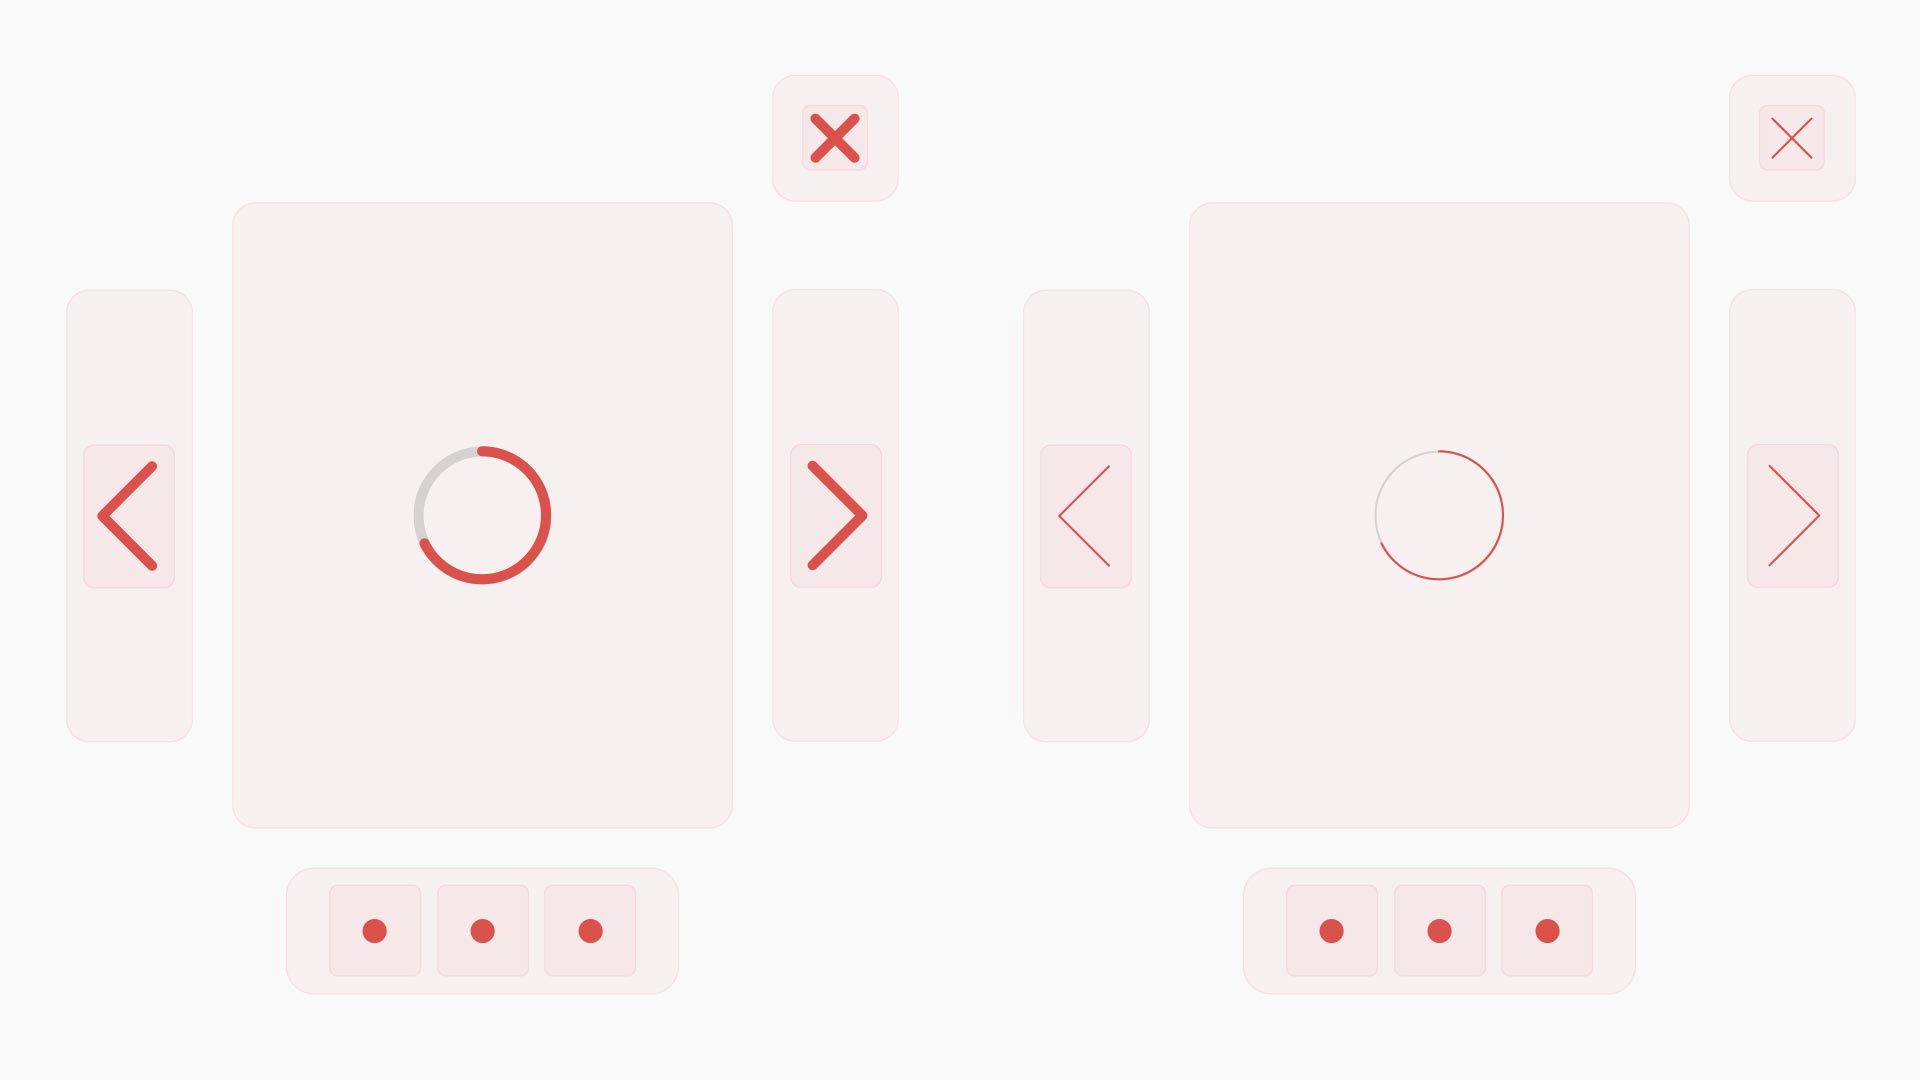 On the left, the line width is 5px, on the right — 1px.